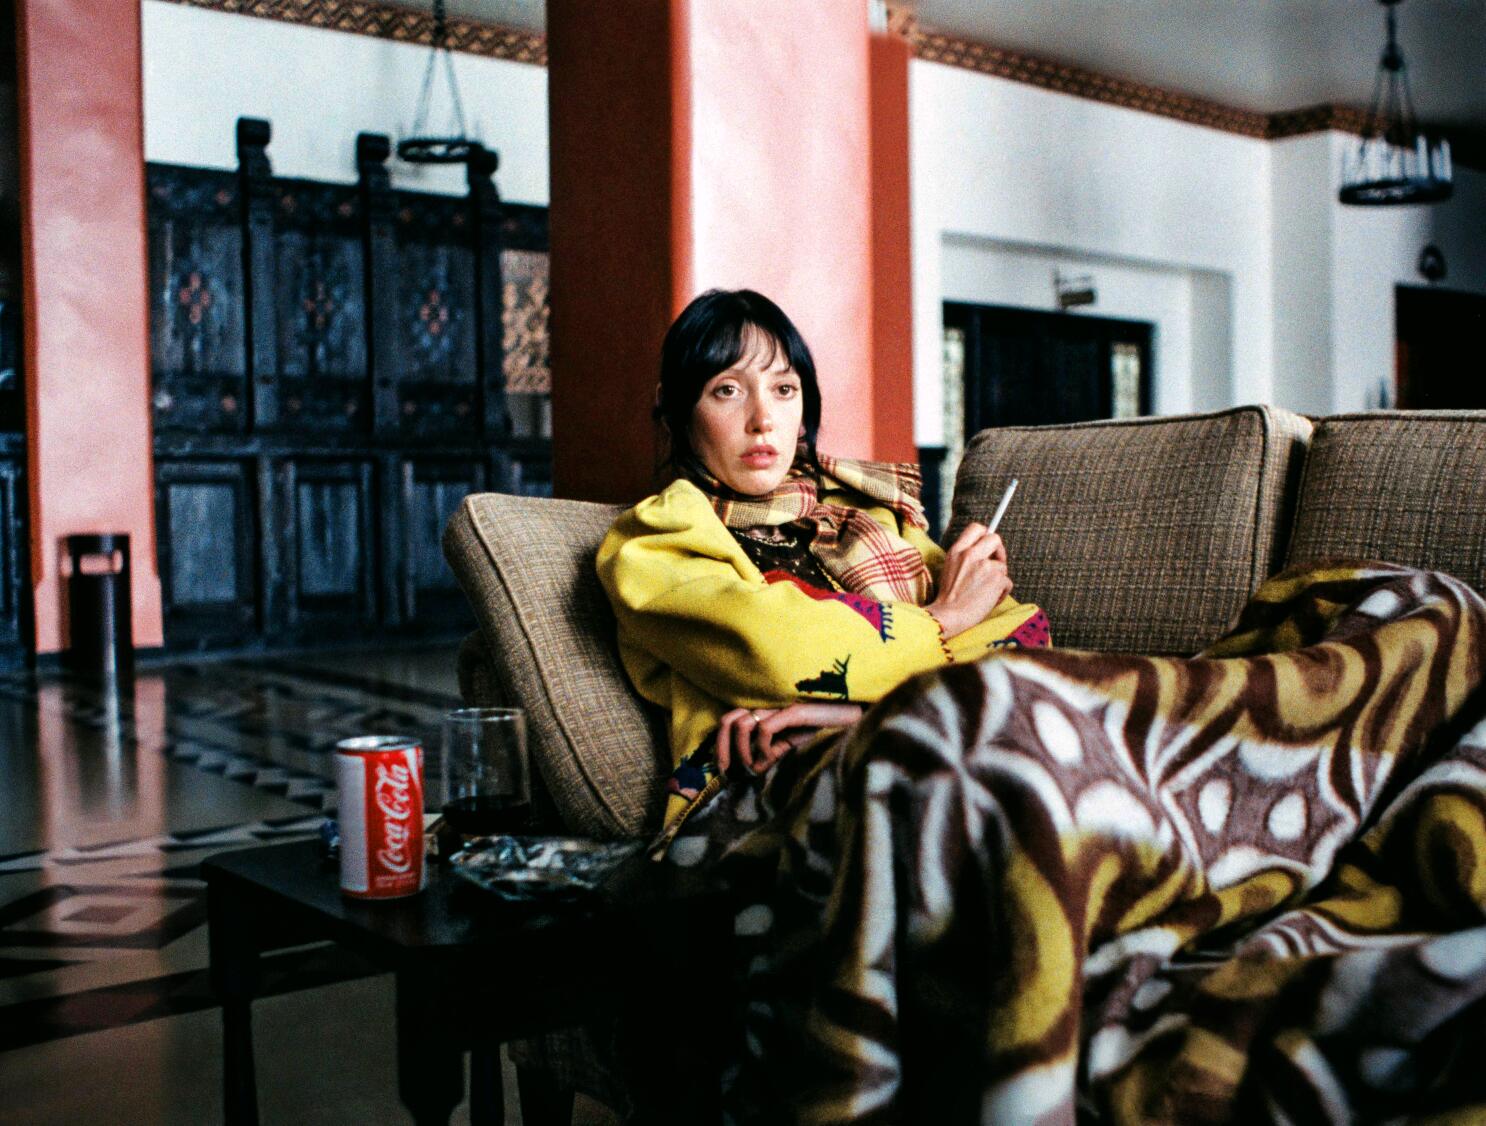 Shelley Duvall's experience shooting Stanley Kubrick's 'The Shining